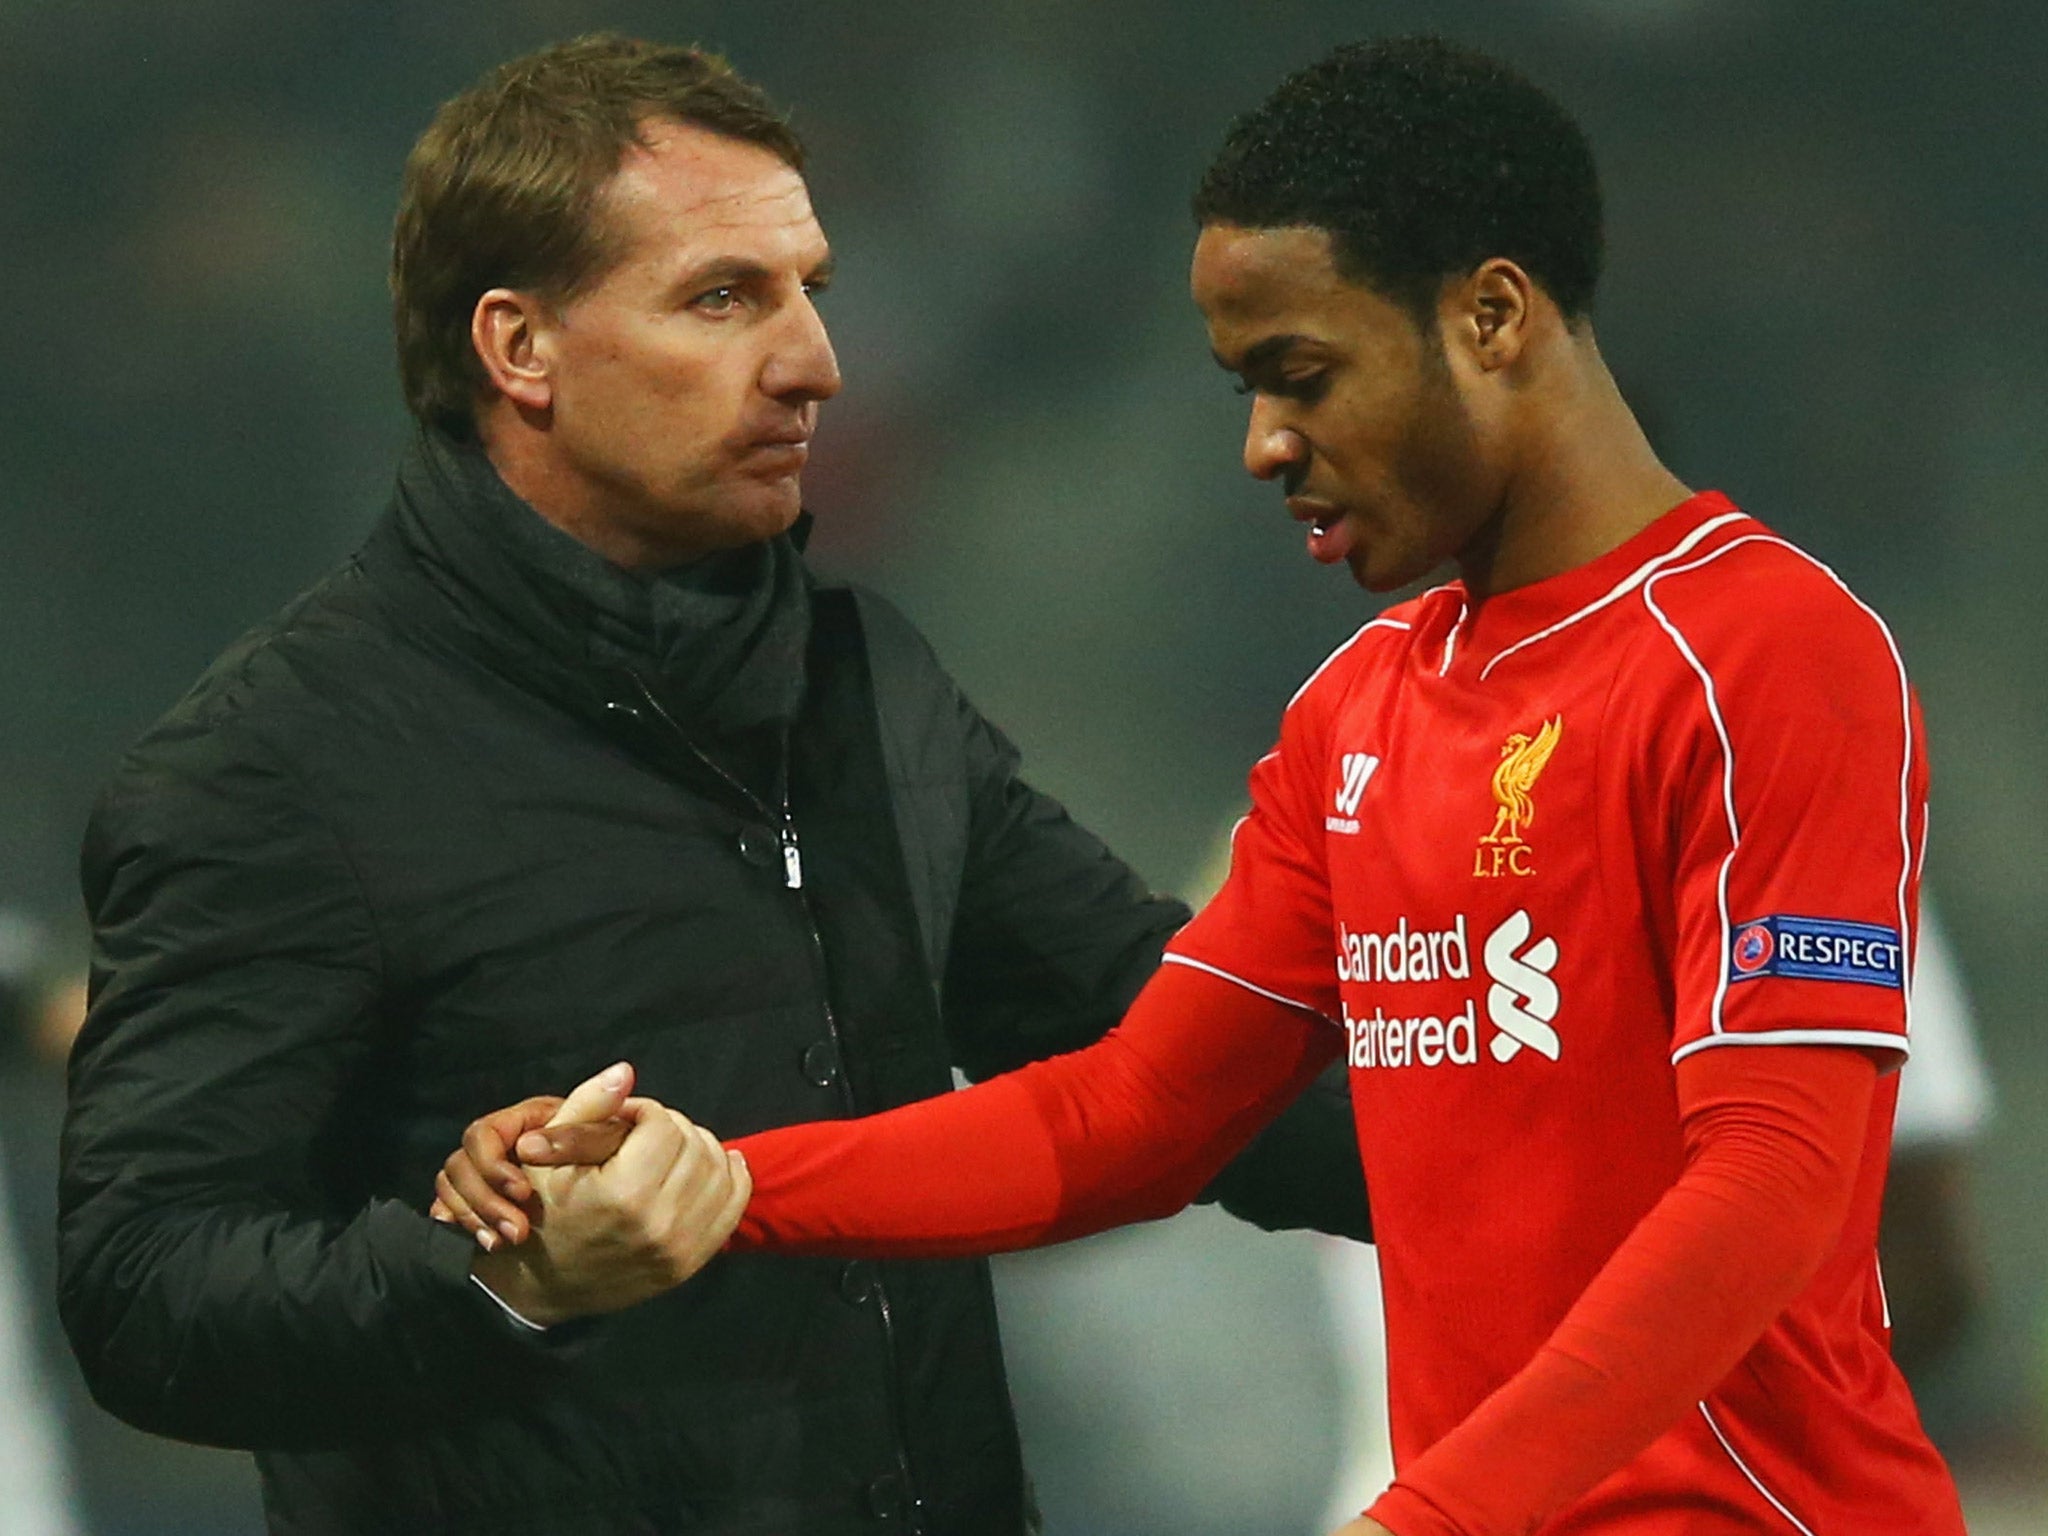 Past form suggests Liverpool's owners will back Brendan Rodgers' refusal to sell Sterling (Getty)